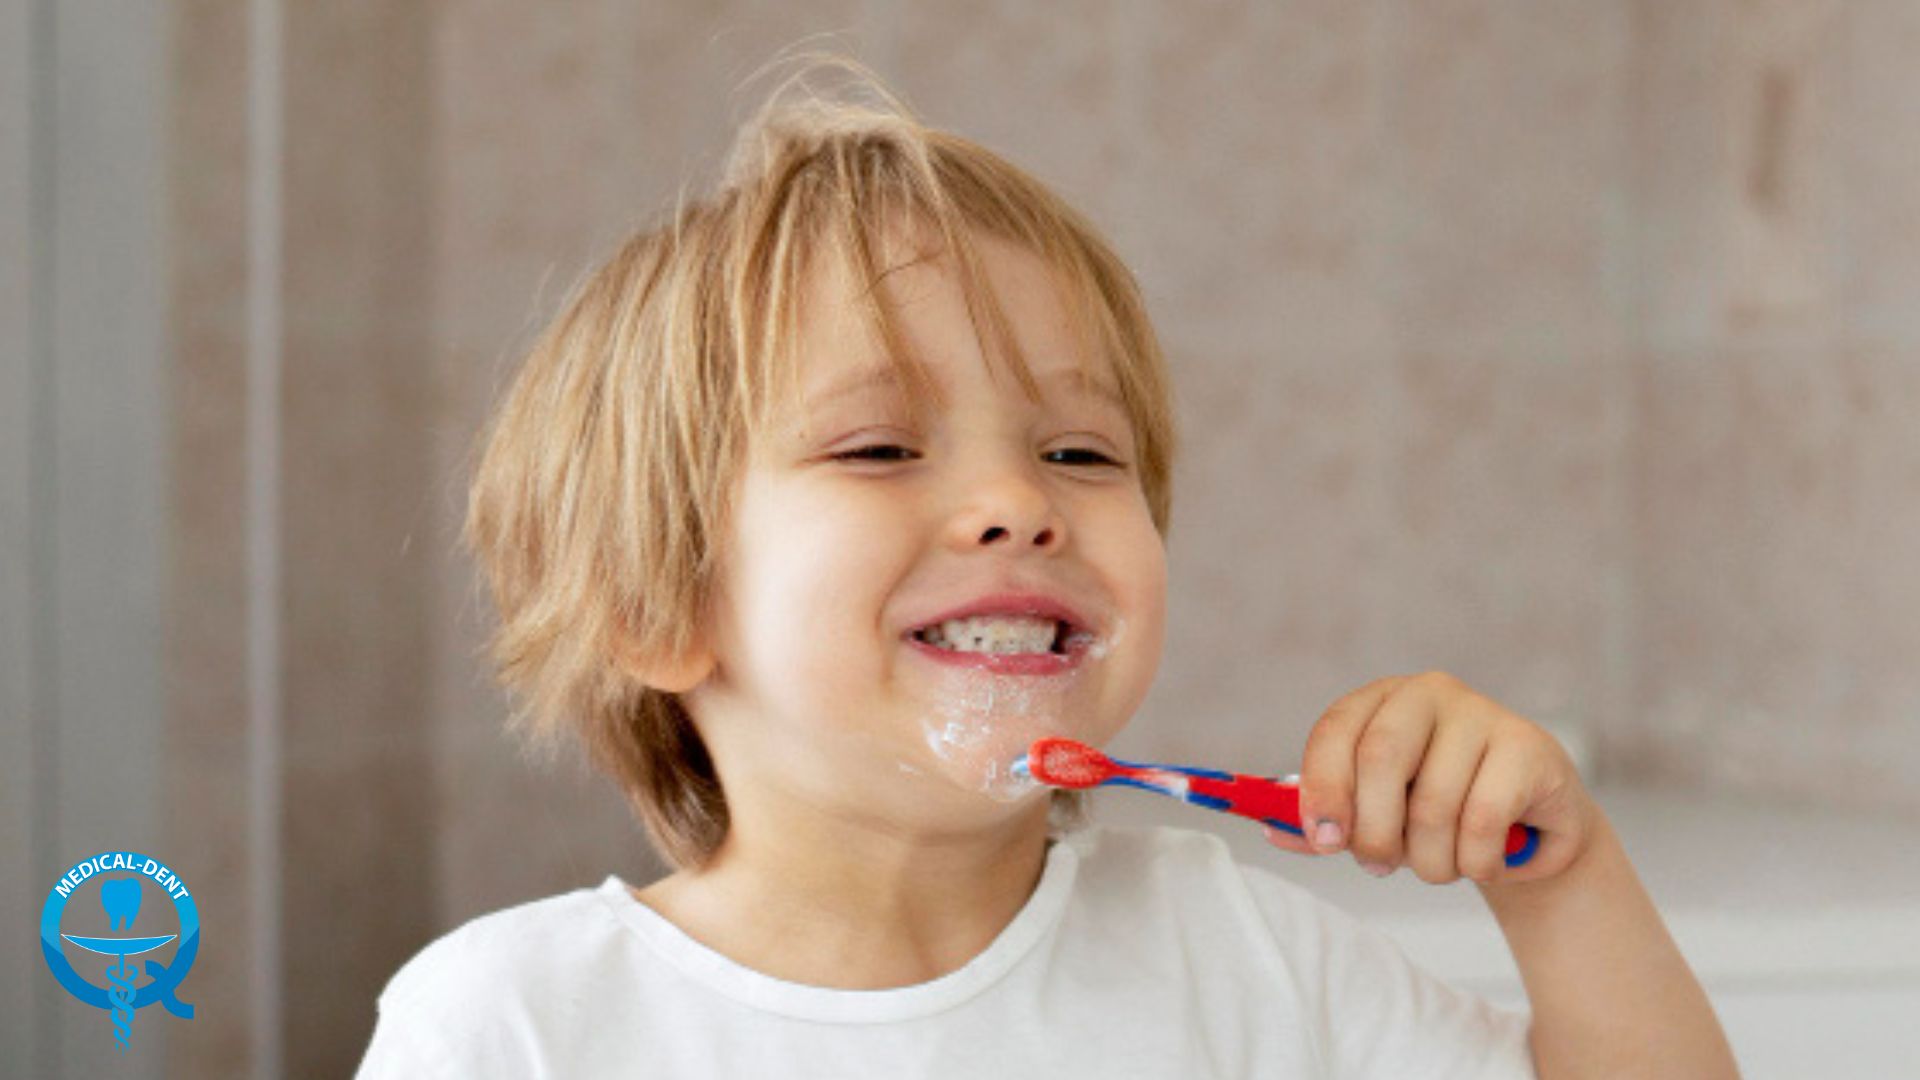 Toothpaste for children - how to choose the best one?